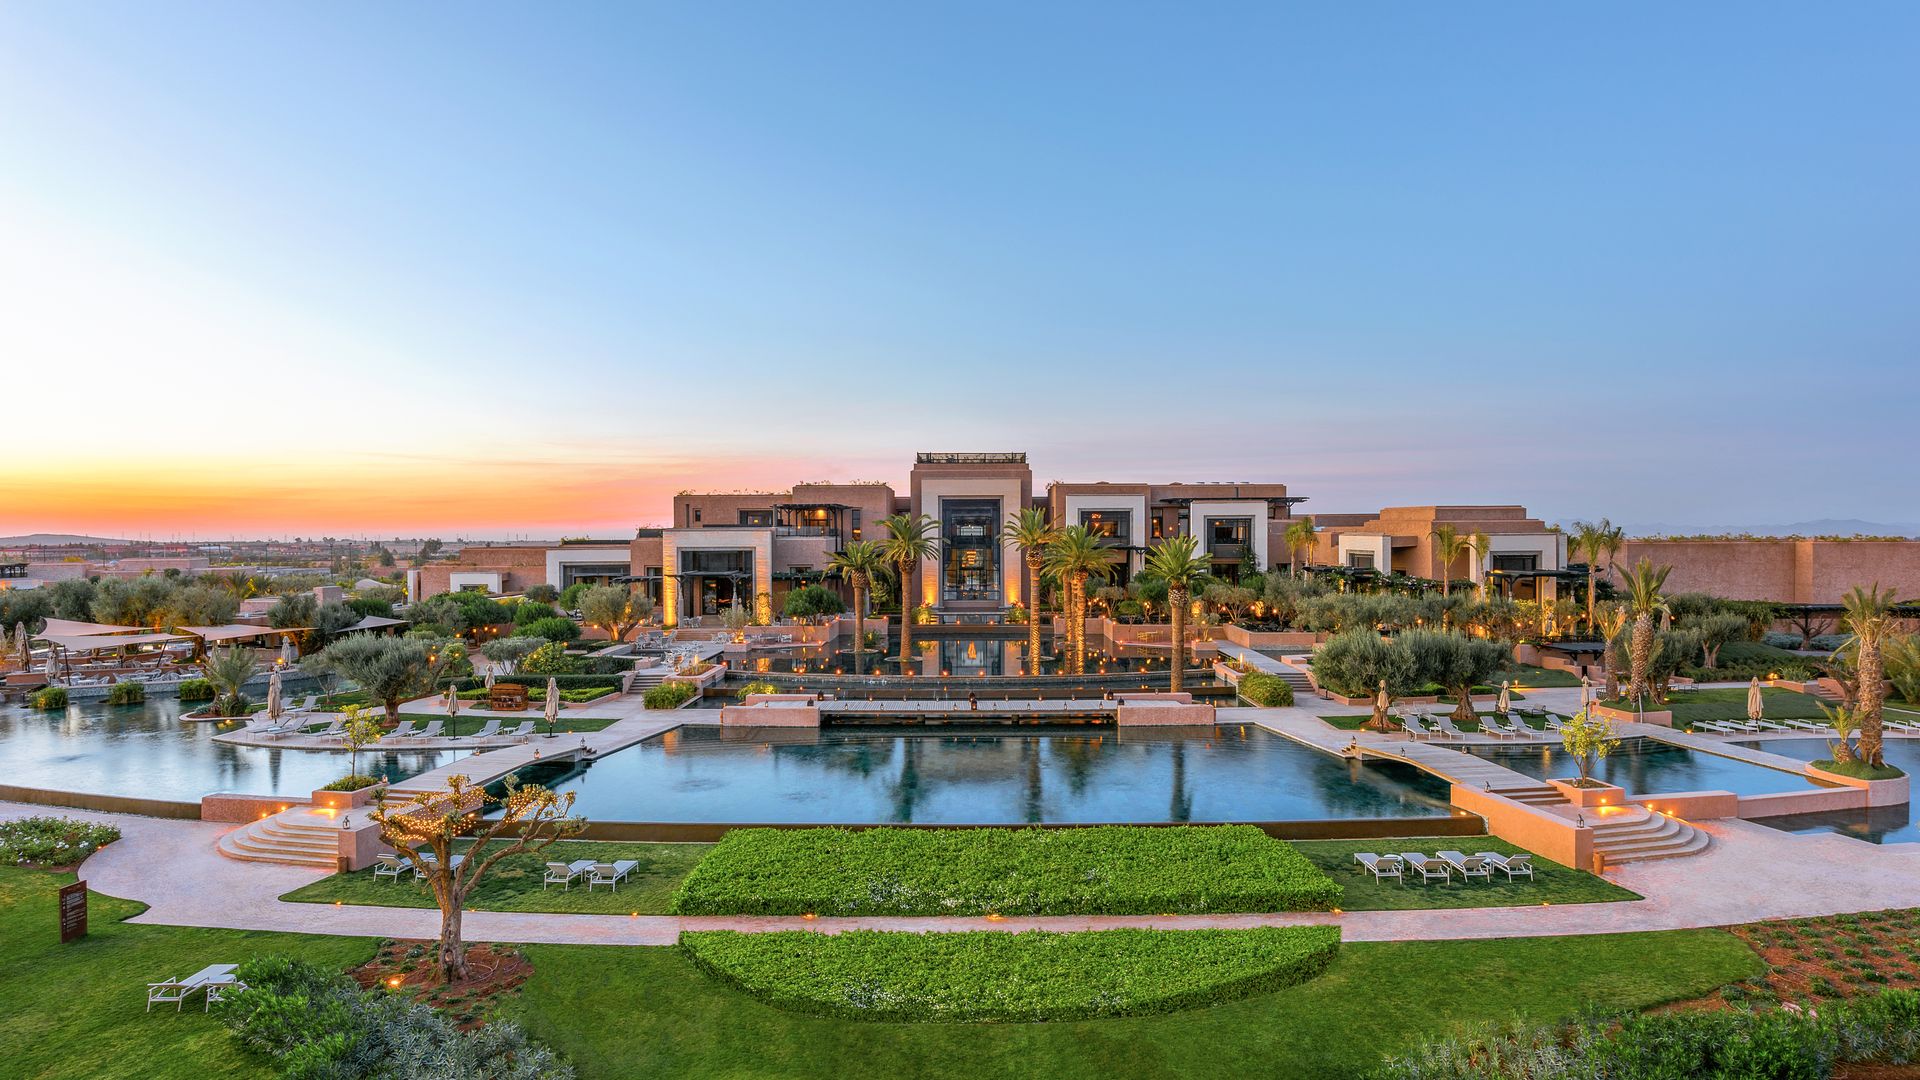 I experienced five-star luxury at Marrakech's most royal-worthy hotel - inside the Fairmont Royal Palm Marrakech